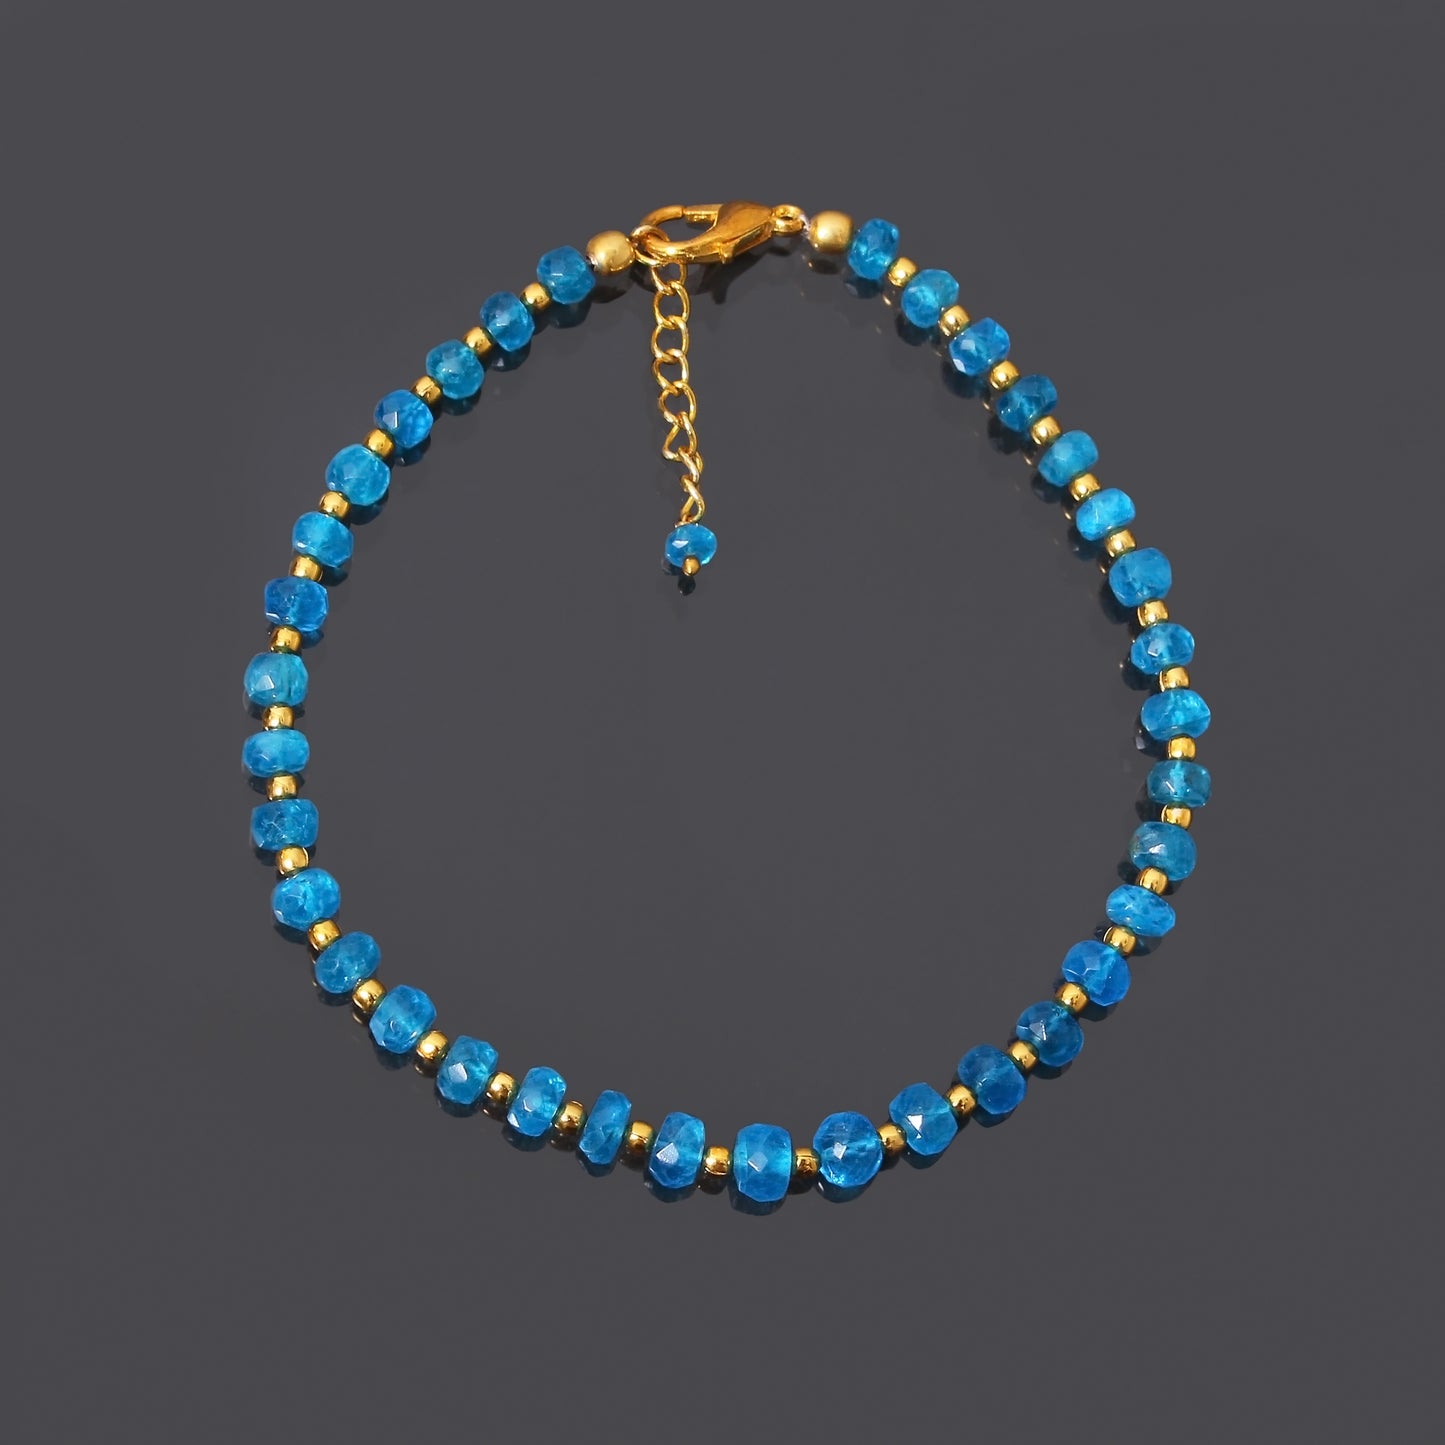 Neon Blue Apatite Gemstone Faceted Rondelle Bracelet with Gold Plated Silver Clasp